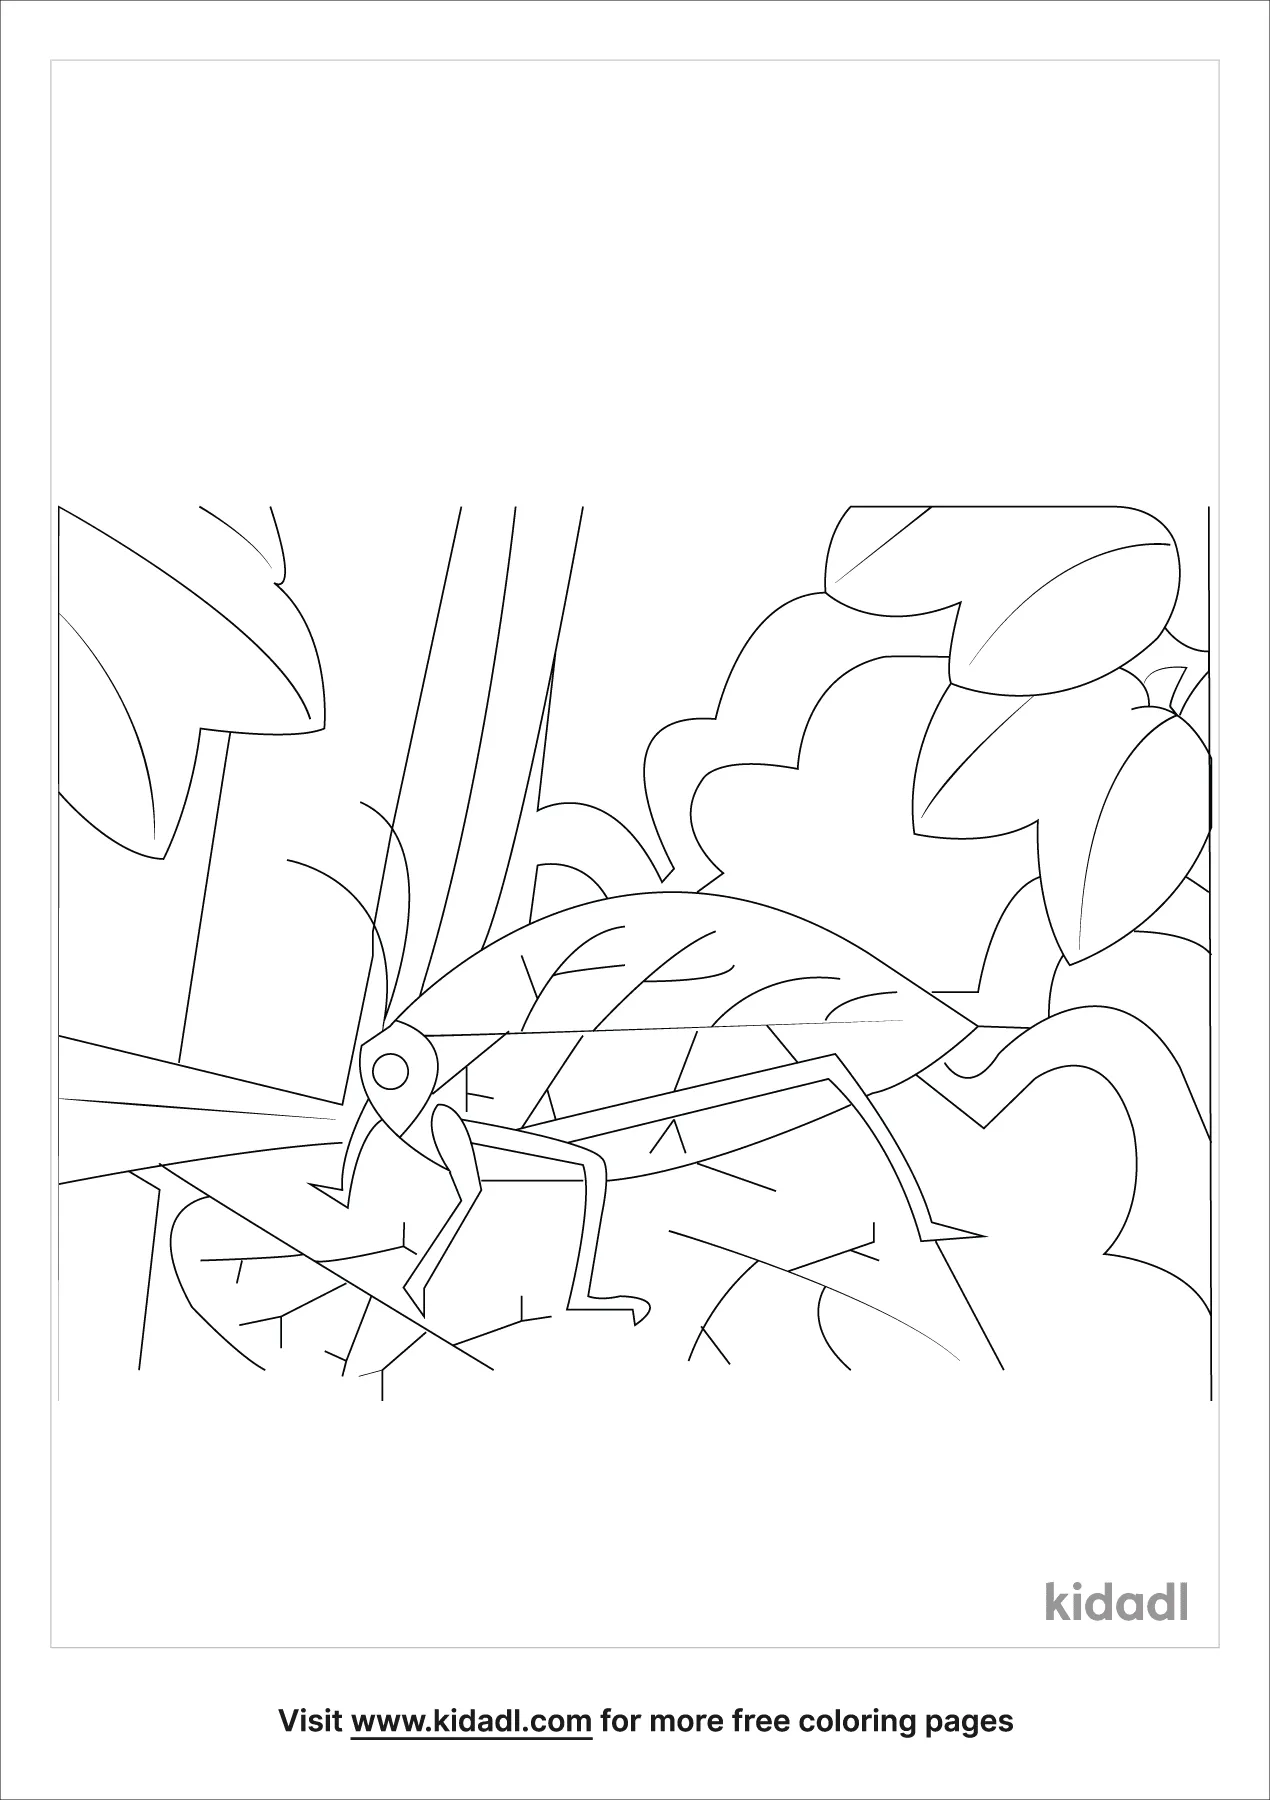 Free Animal Camouflage Coloring Page | Coloring Page Printables | Kidadl